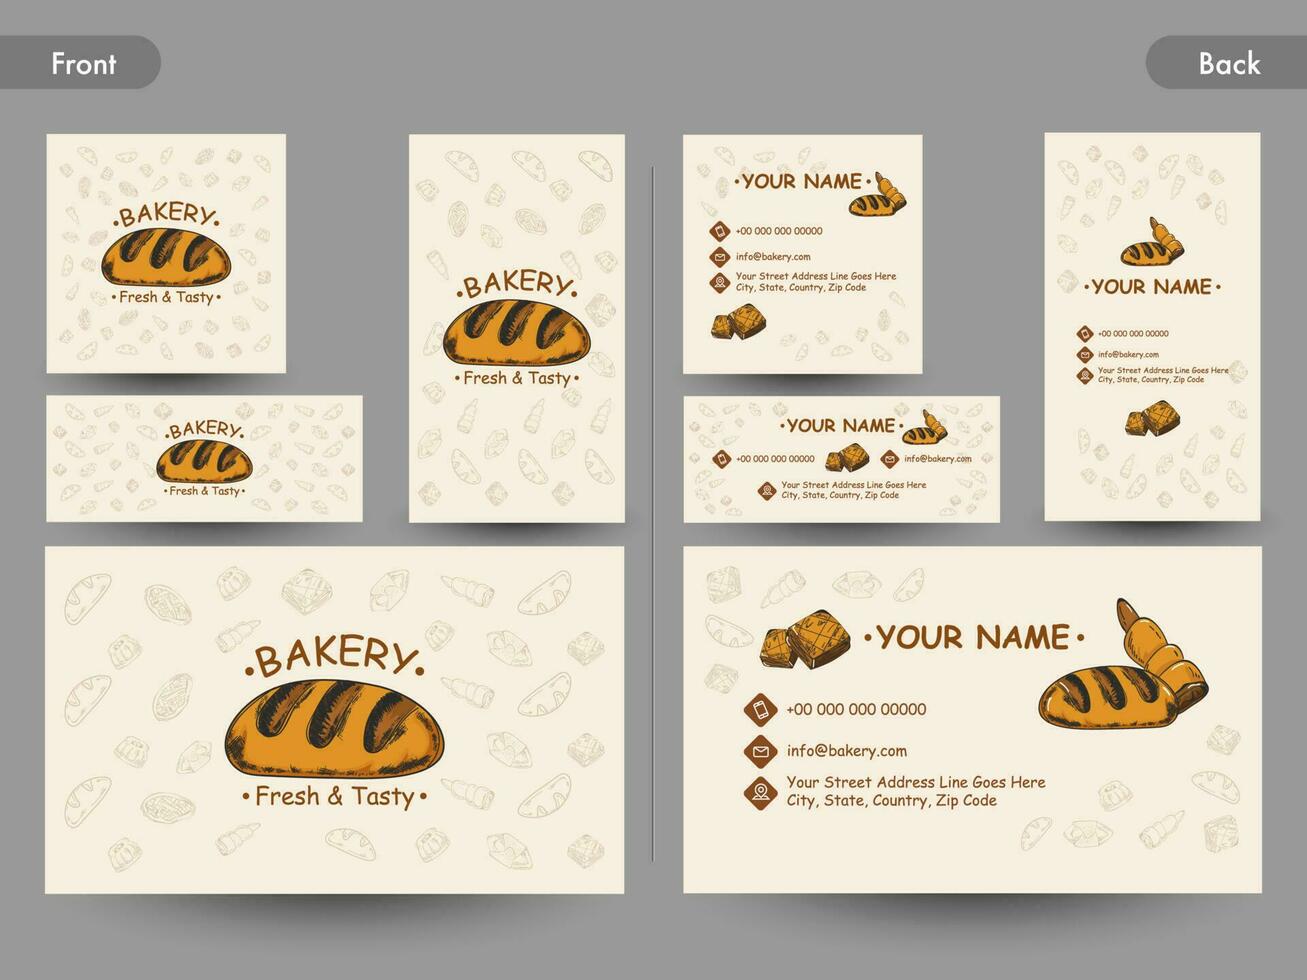 Bakery business card collection with front and back presentation. vector